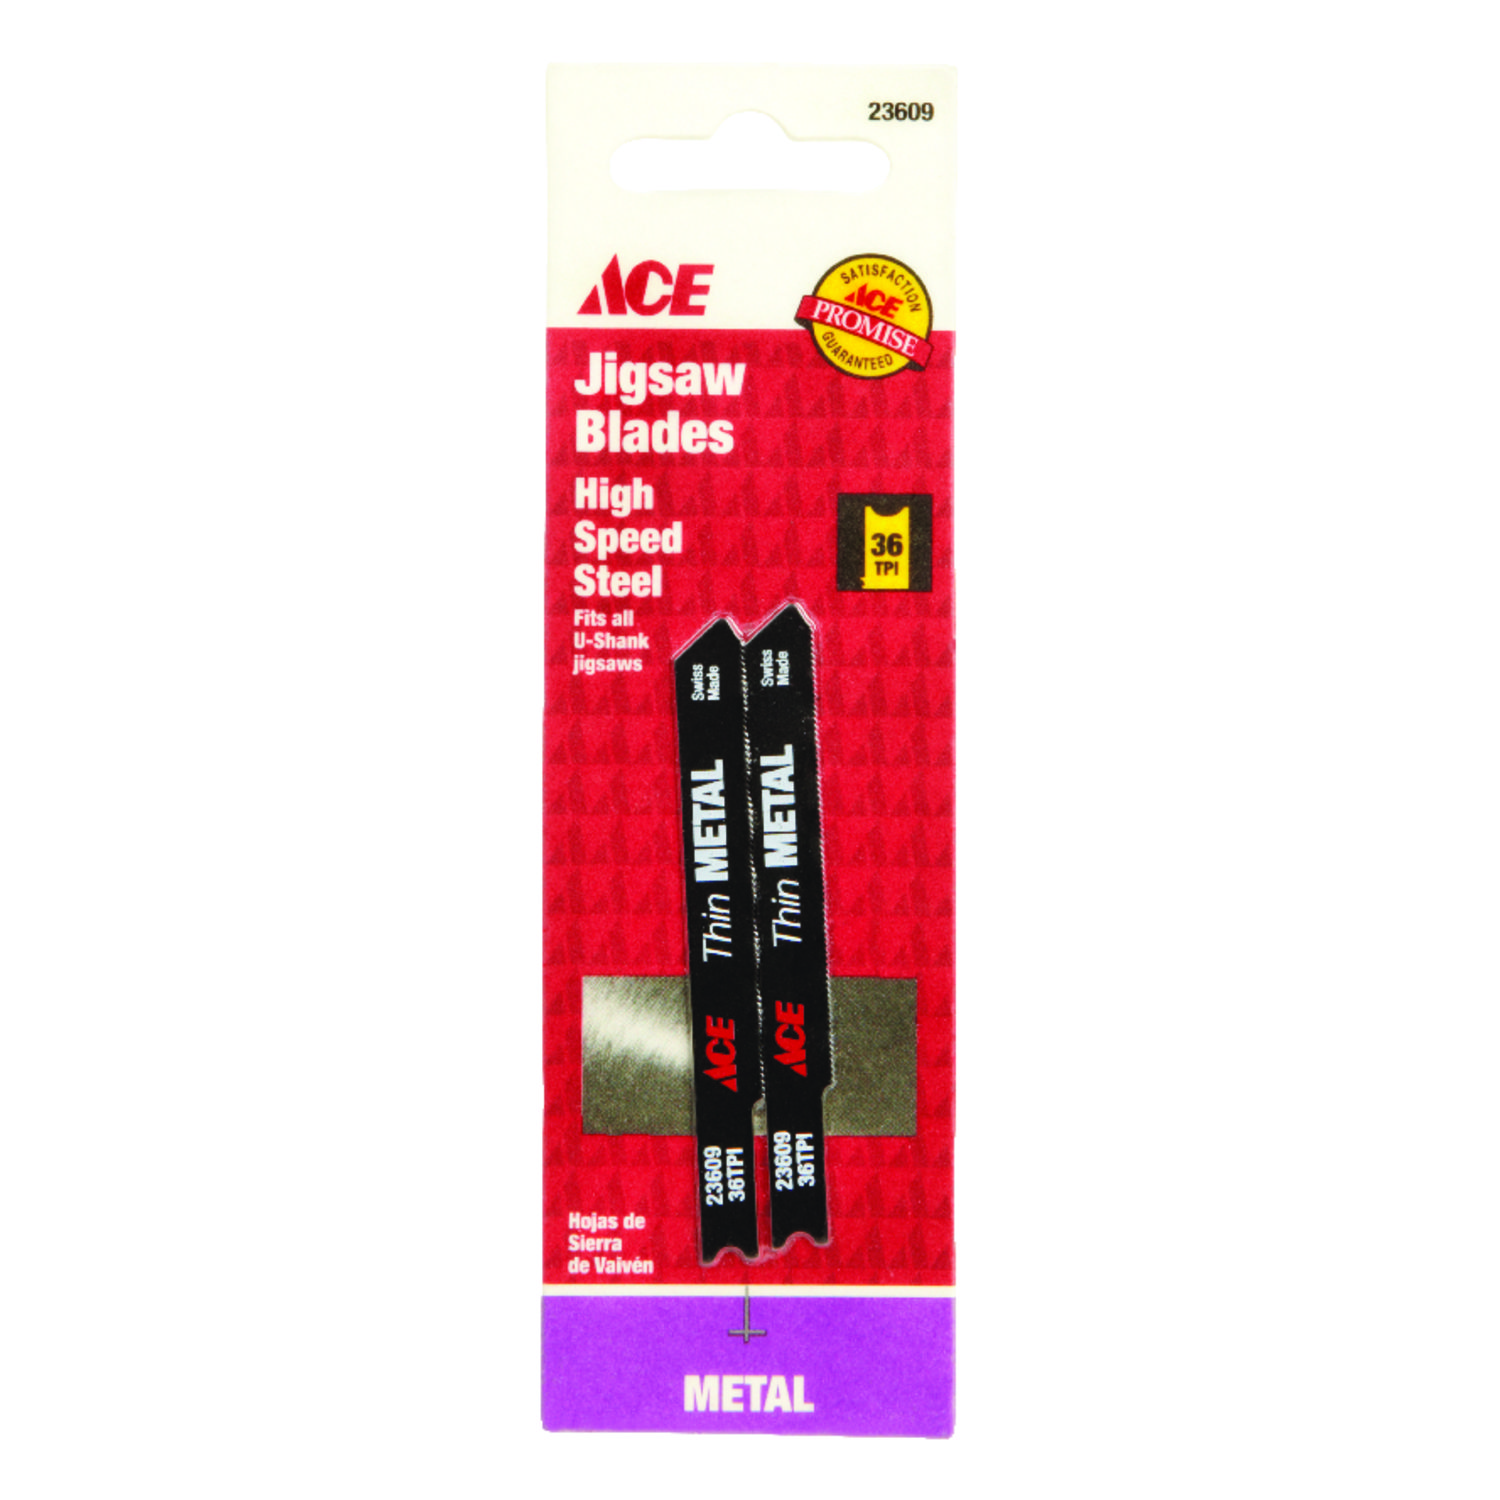 Ace High Speed Steel Universal 2-3/4 in. L Jig Saw Blade 36 TPI 2 pk